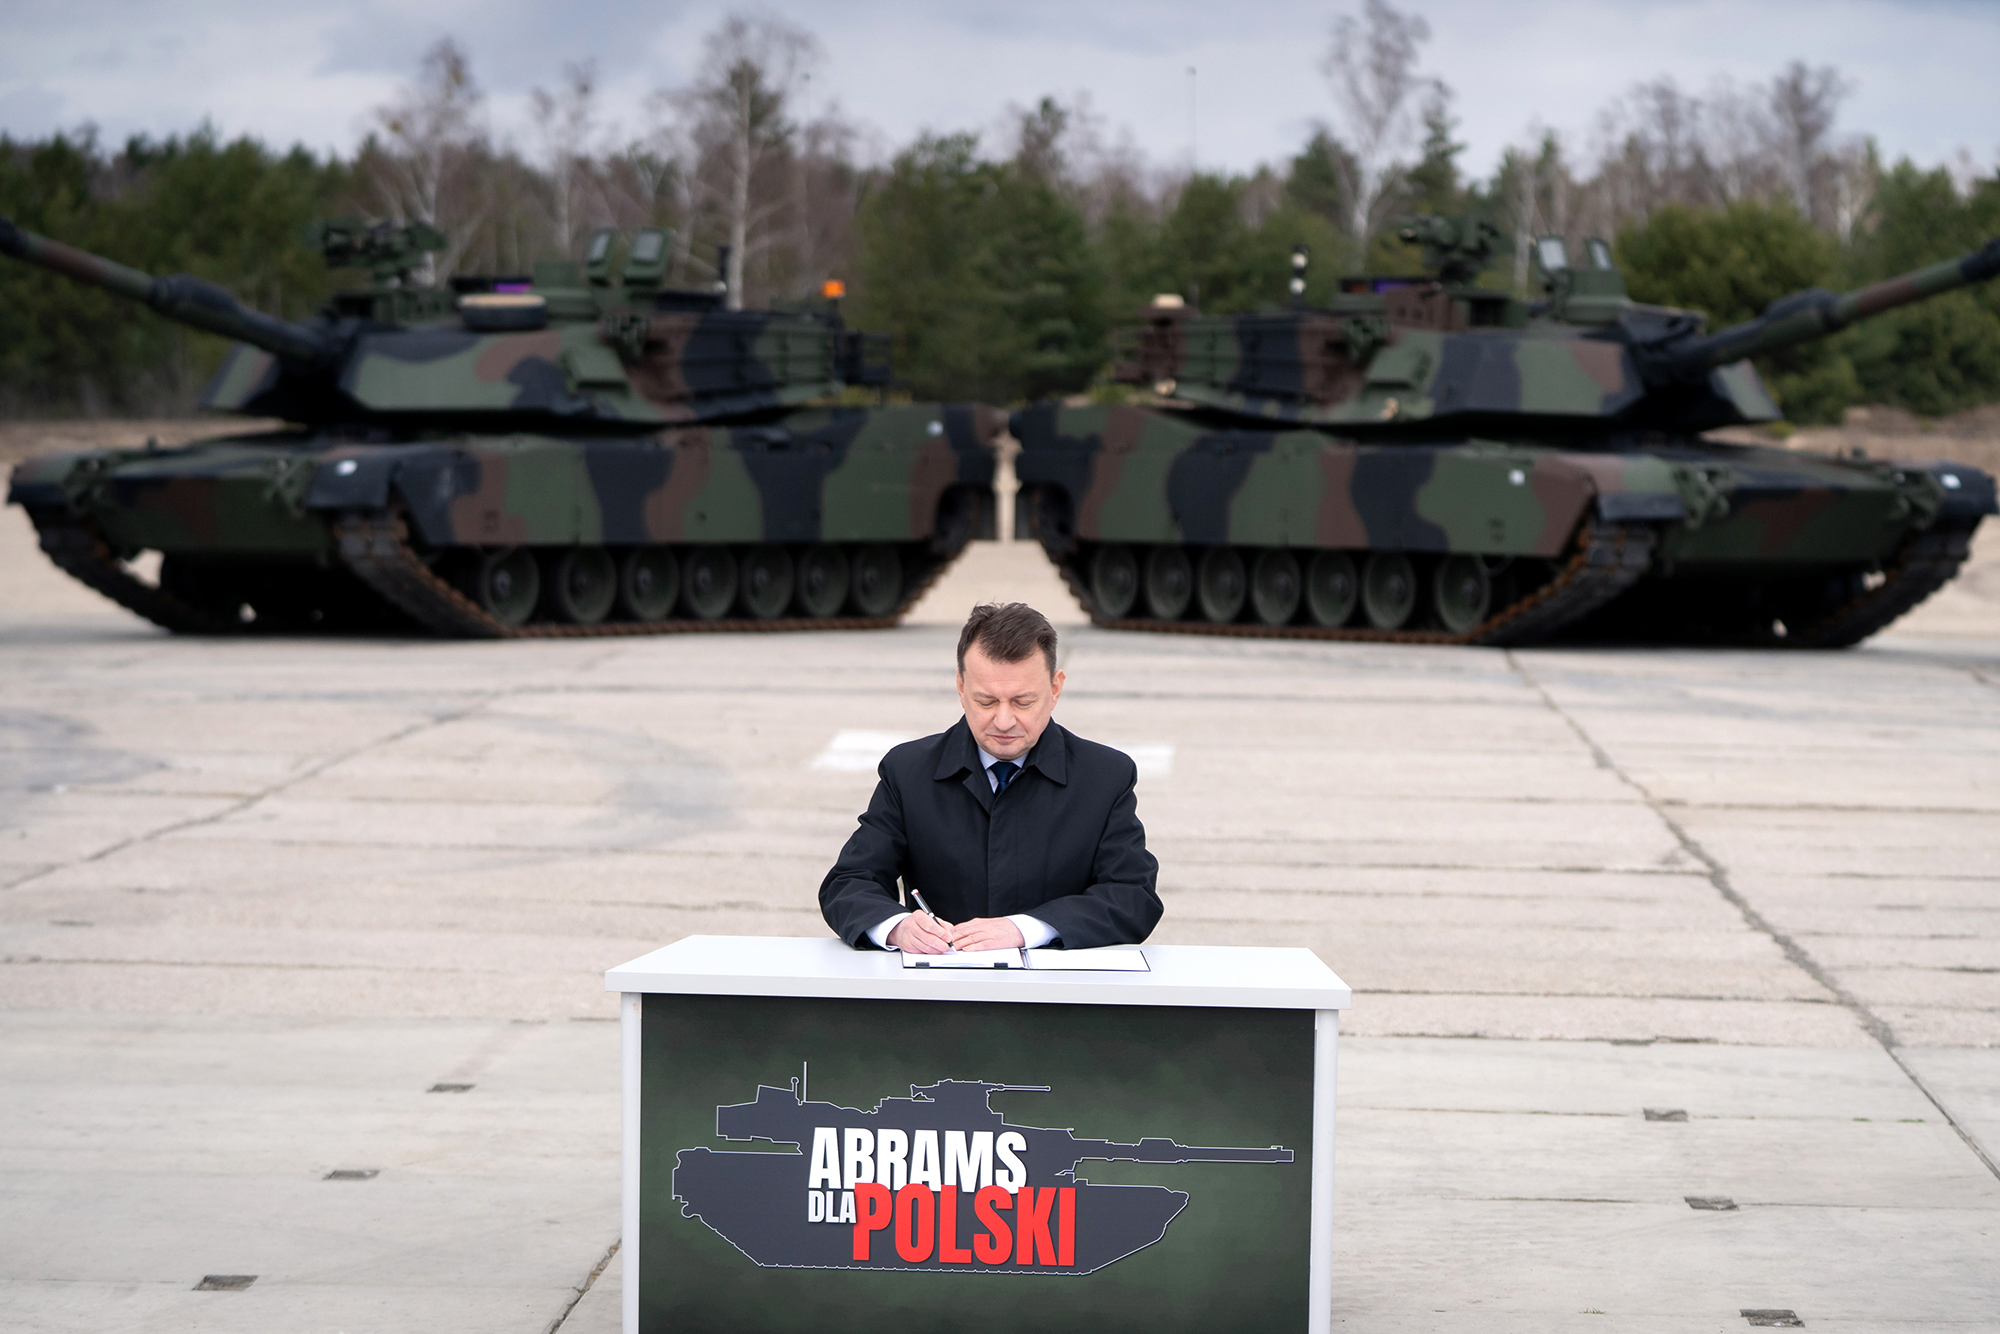 Polish Defense Minister Mariusz Blaszczak signs a contract for the purchase of 250 Abrams tanks for the Polish Army in the 1st Warsaw Armored Brigade in Wesola near Warsaw, Poland, on April 5.